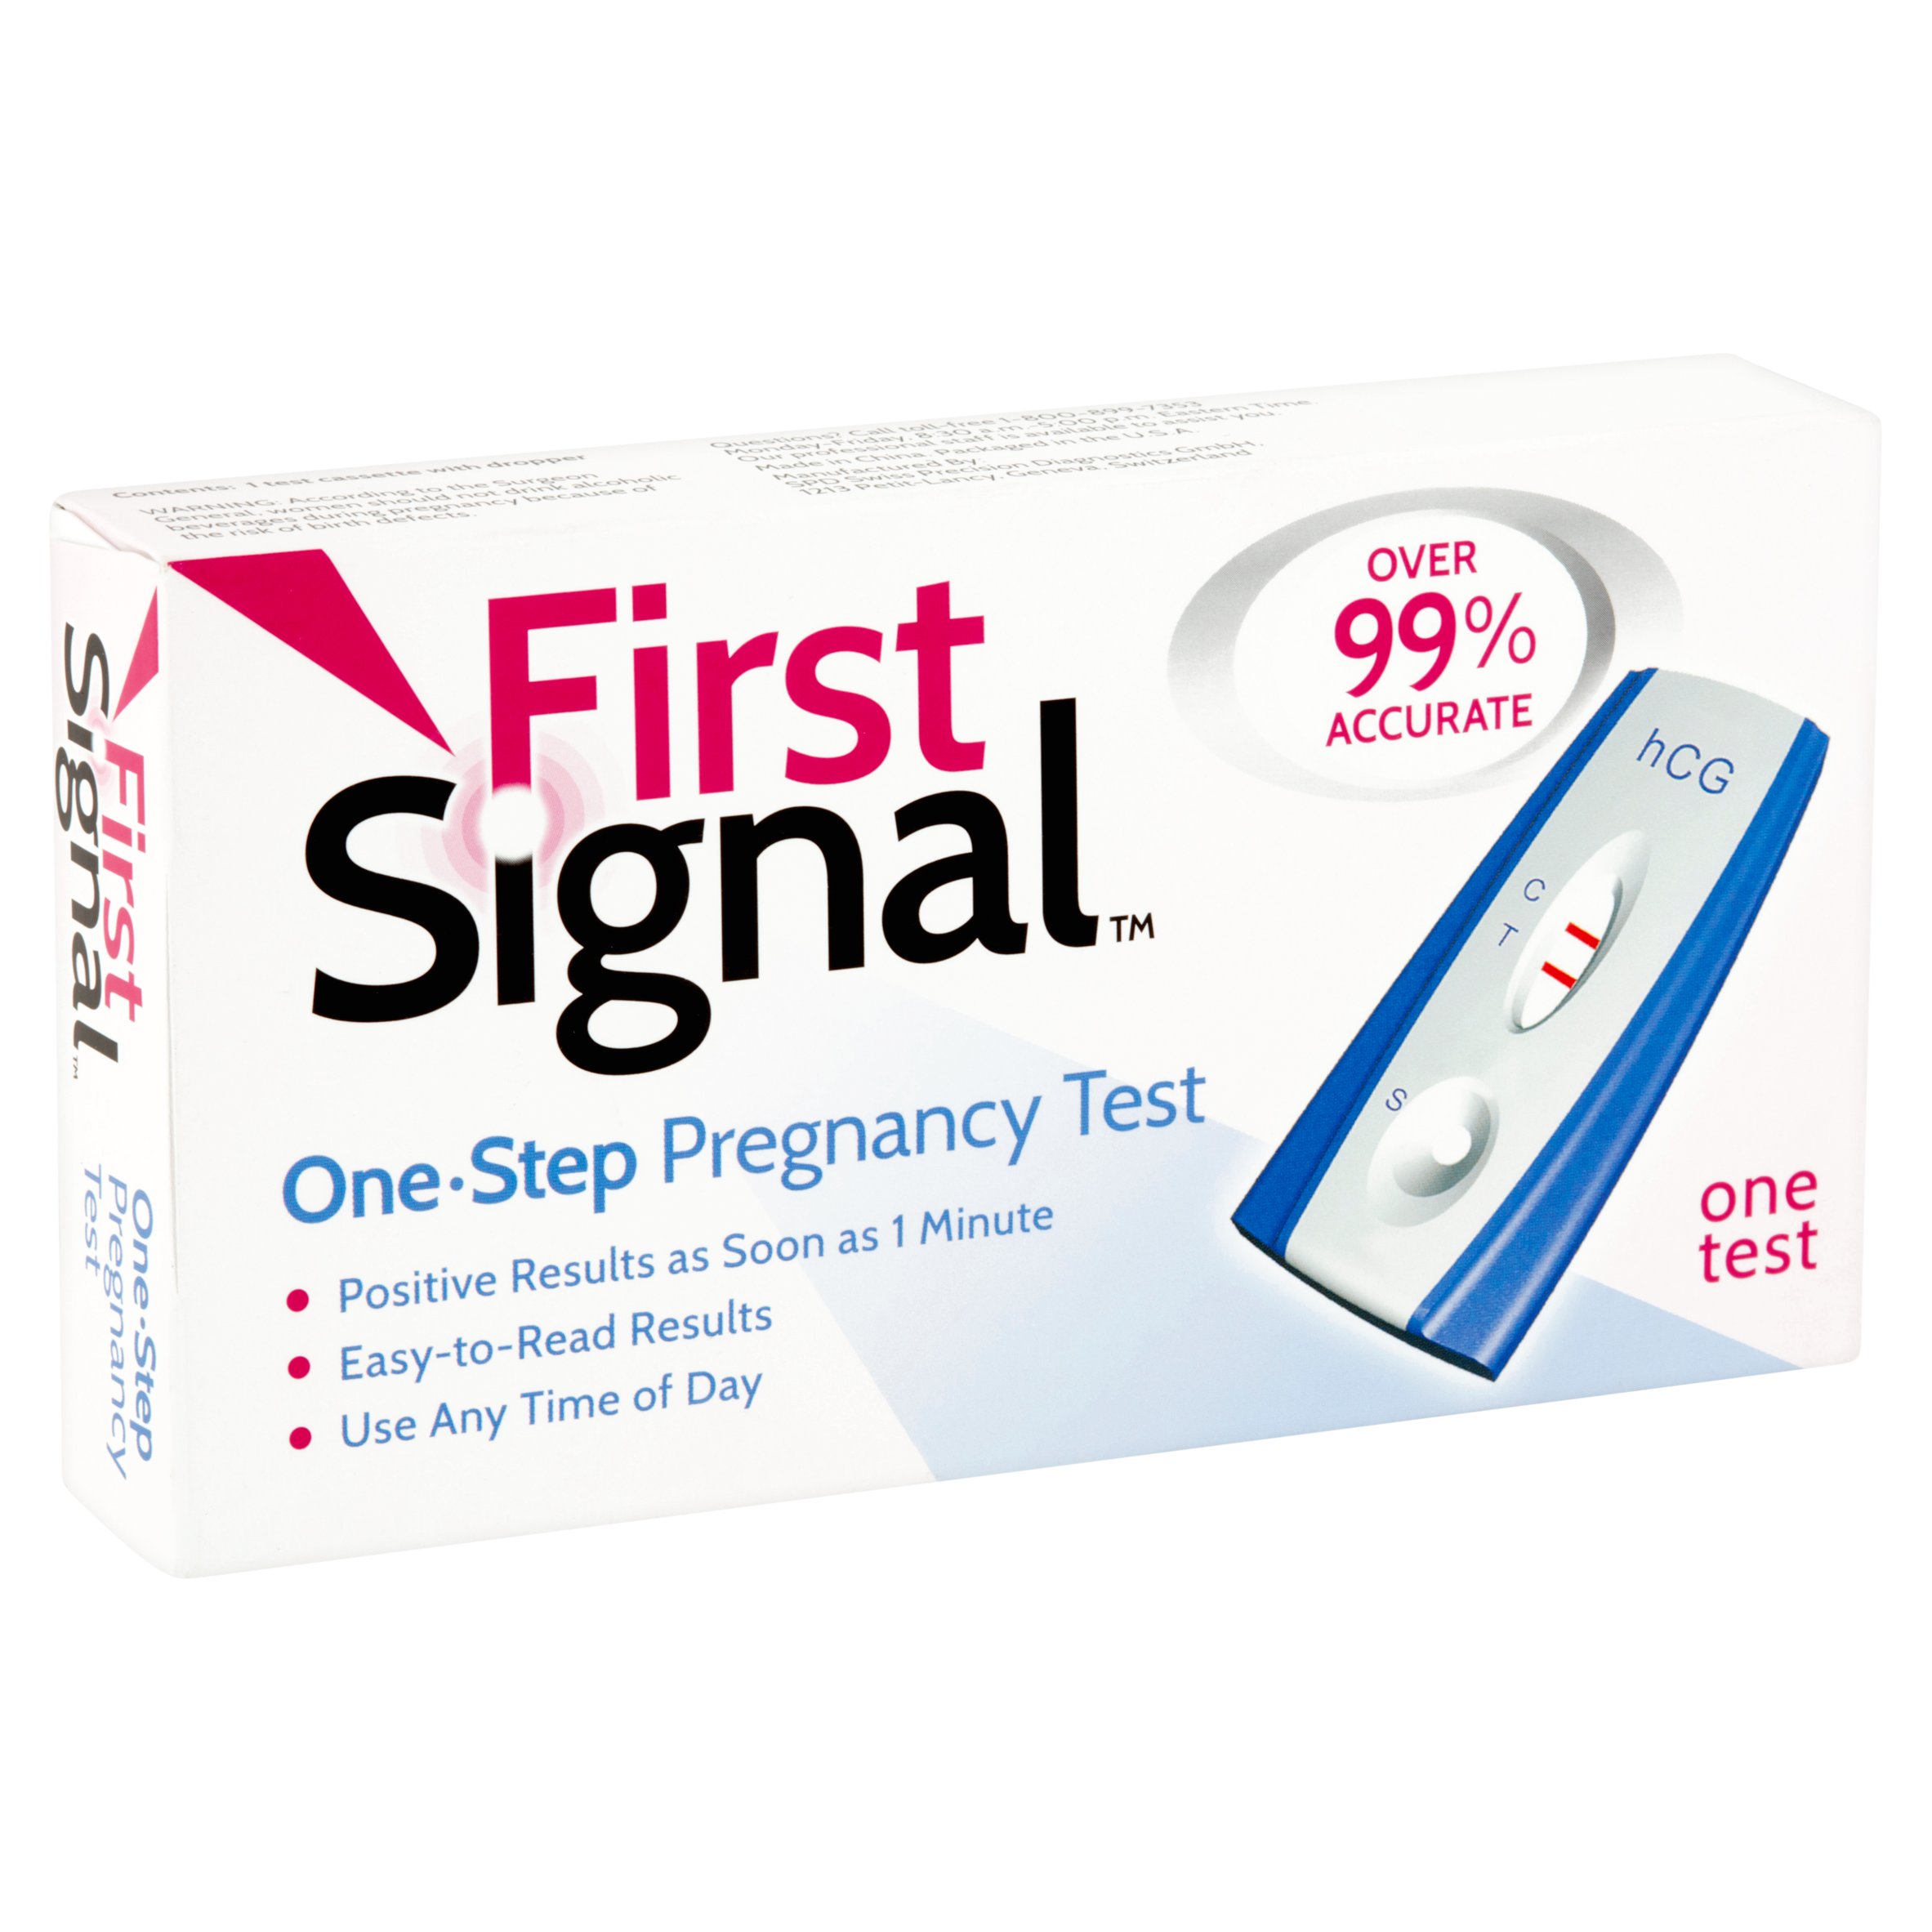 First Signal One-Step Pregnancy Test - image 2 of 5